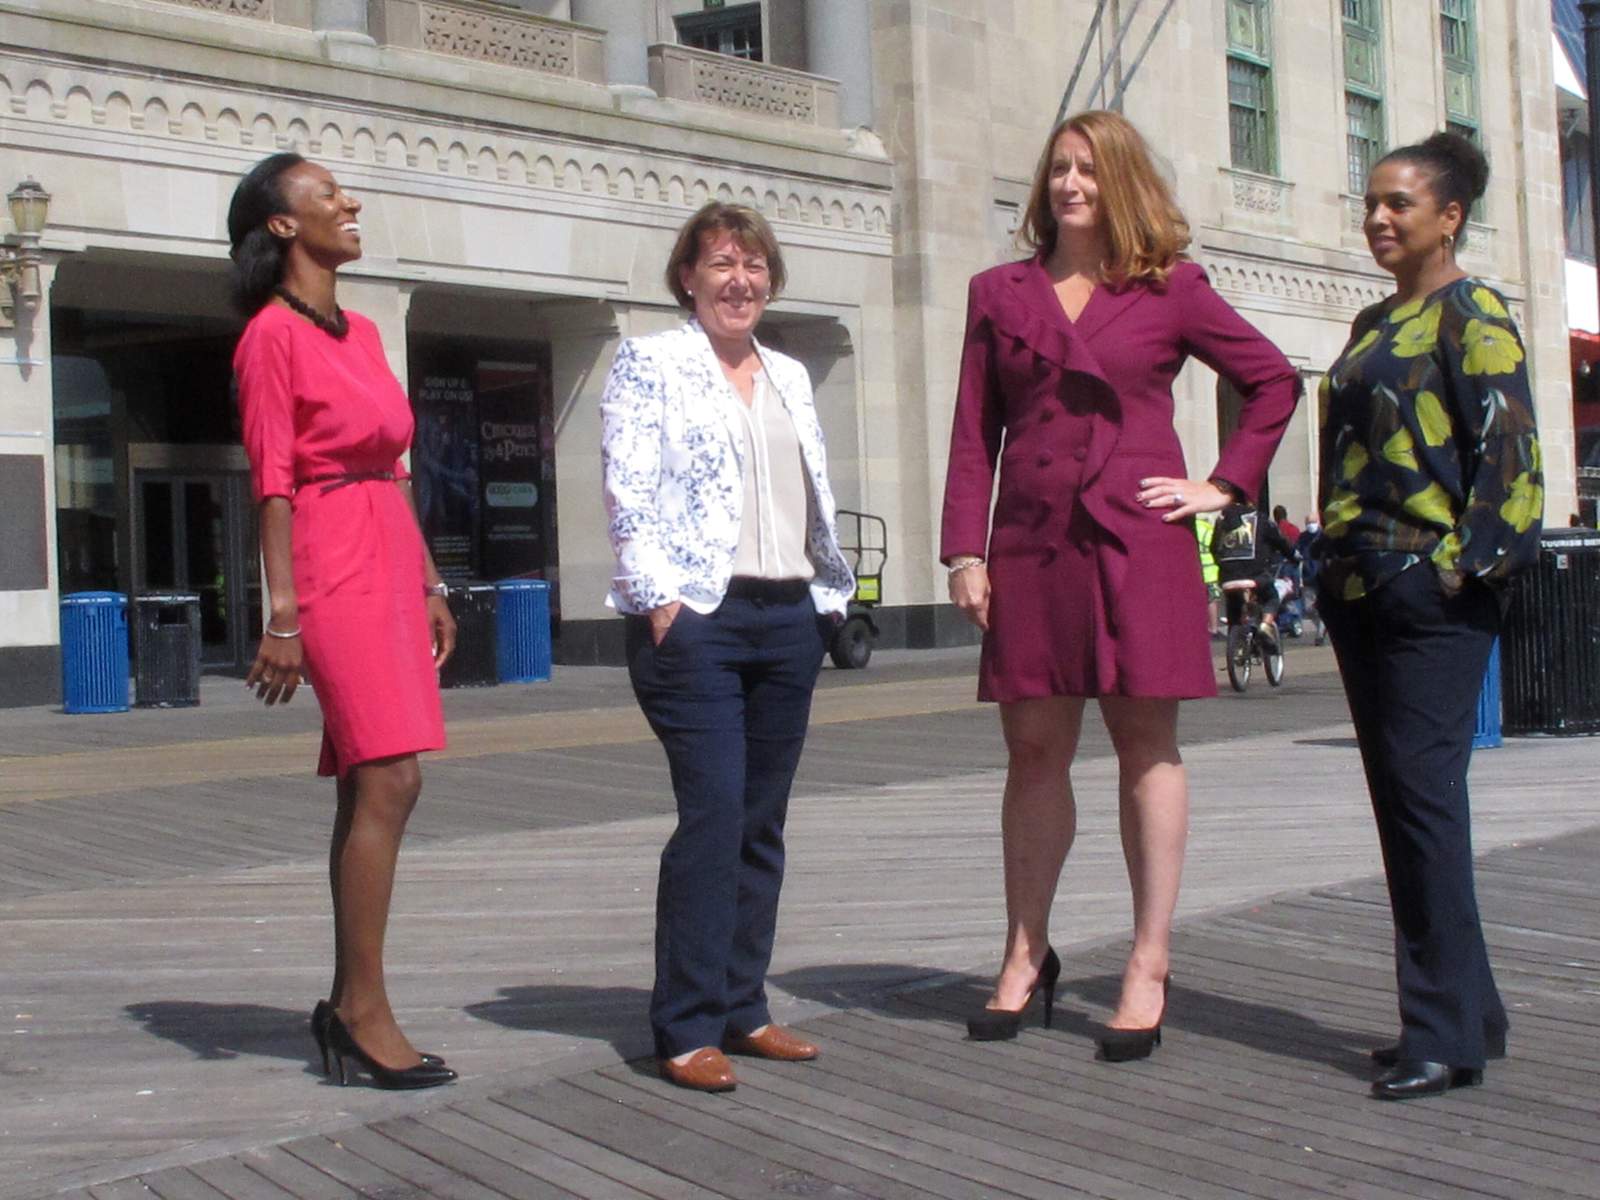 Atlantic City is leading a wave of female casino leaders